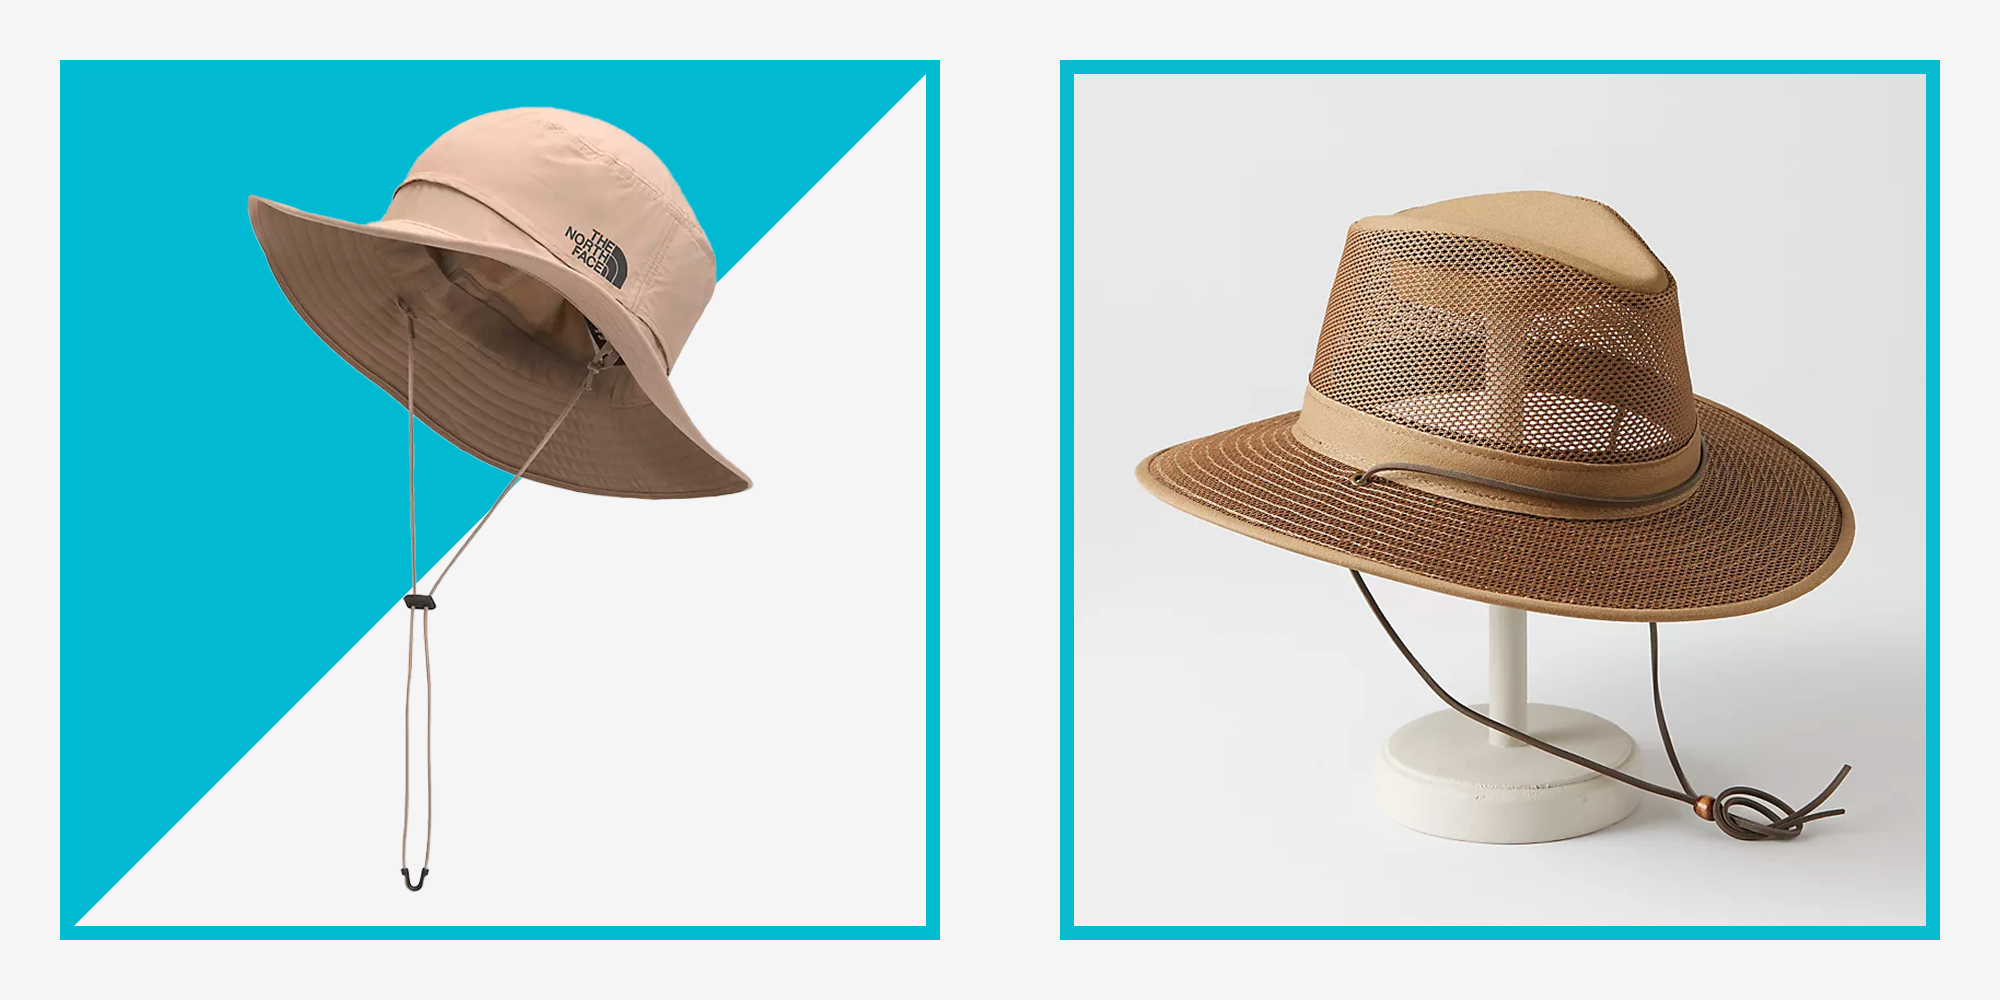 10 Fashionable Sun Hats You Won't Be Embarrassed to Wear